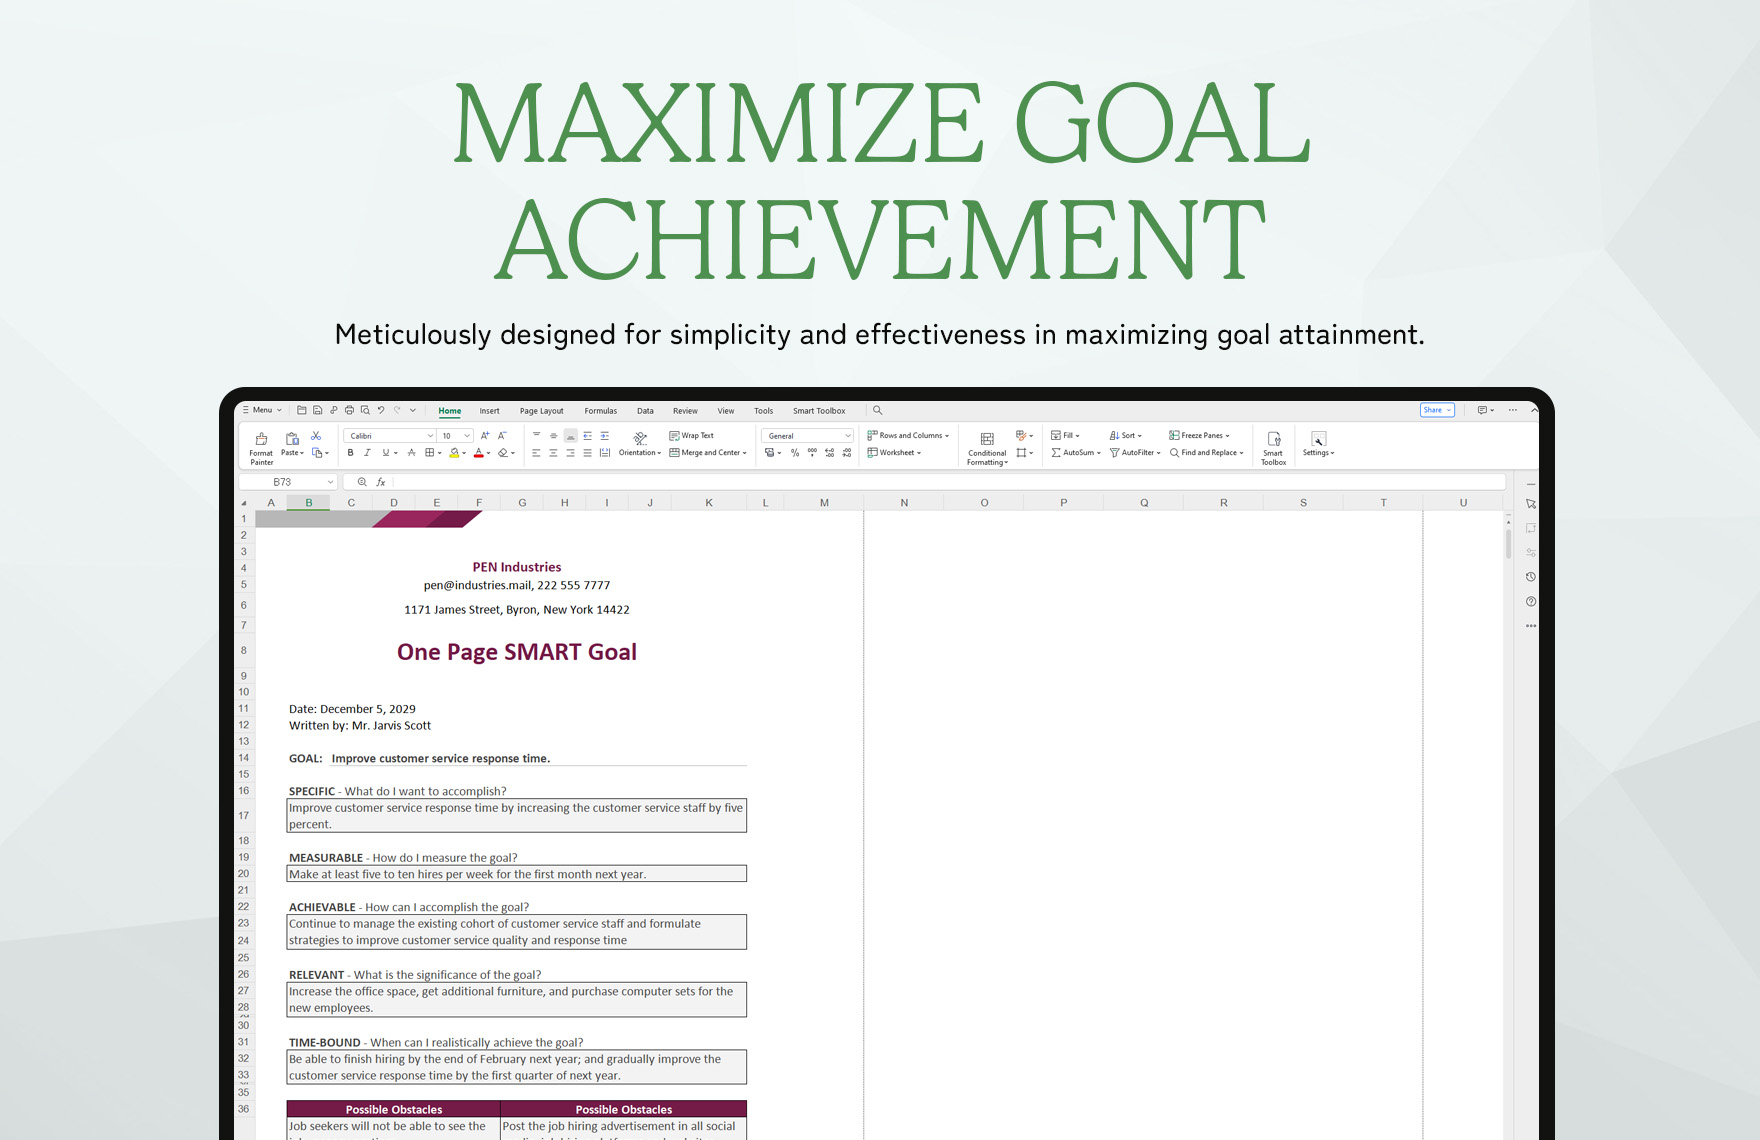 One Page Smart Goal Template